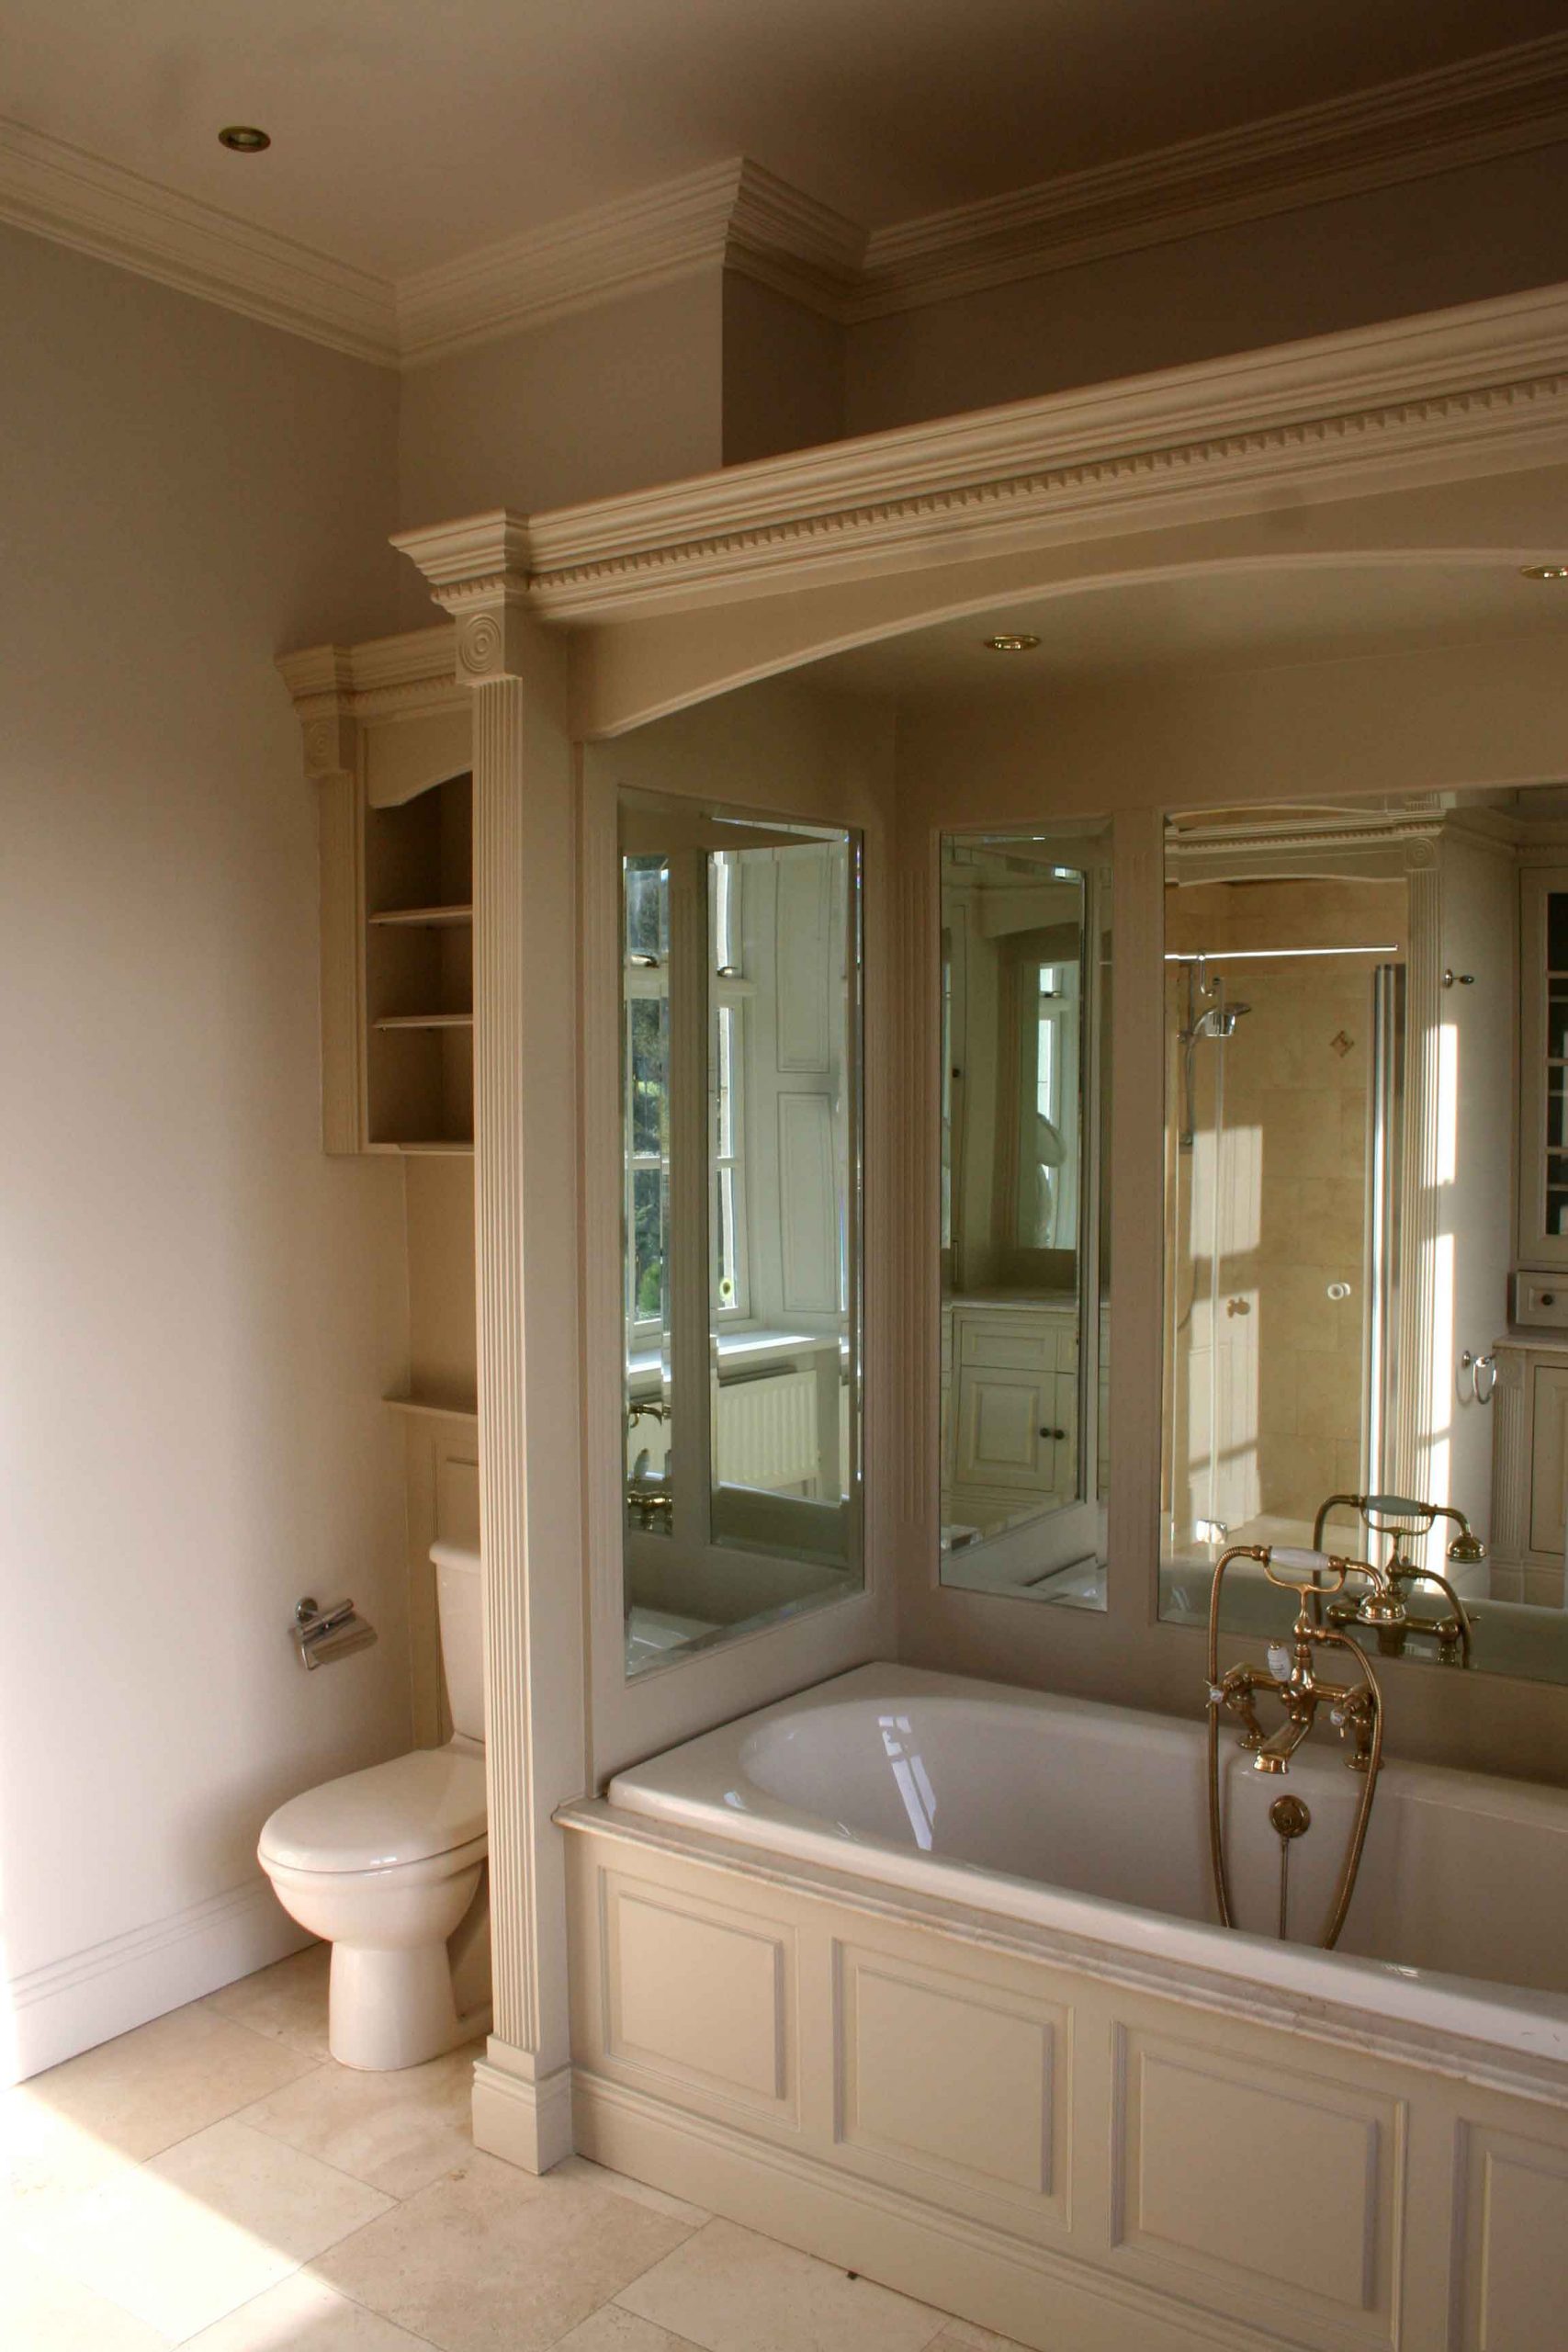 Bespoke hand painted bathrooms and bathroom units and furniture painters by Impressions Painters and Decorators in Dublin